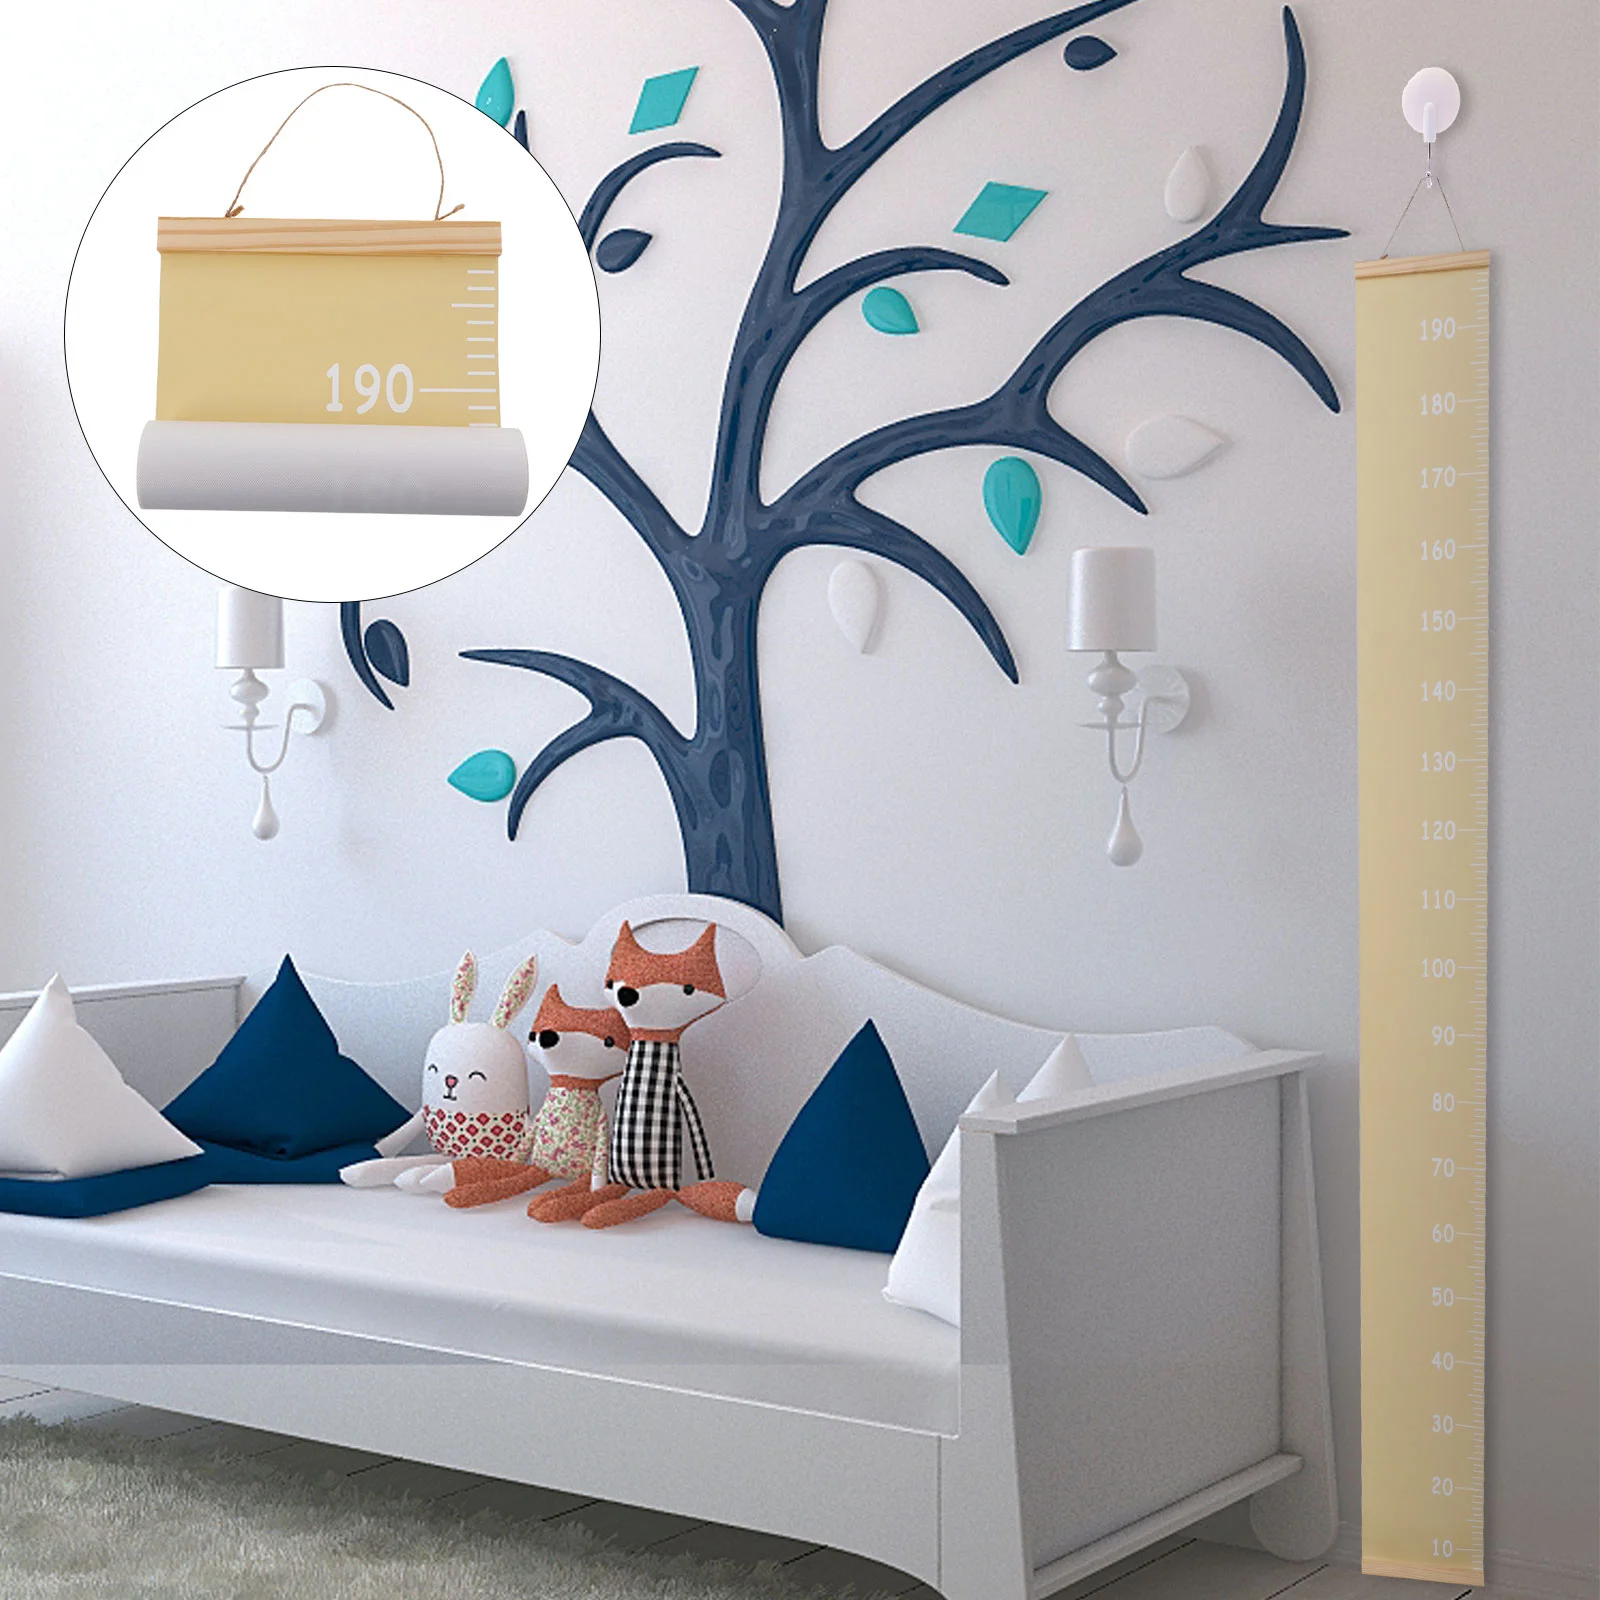 

Children's Height Ruler Hanging Chart Home Wall Rulers Pendant Kids Decor Measurement Measuring Mural Growth